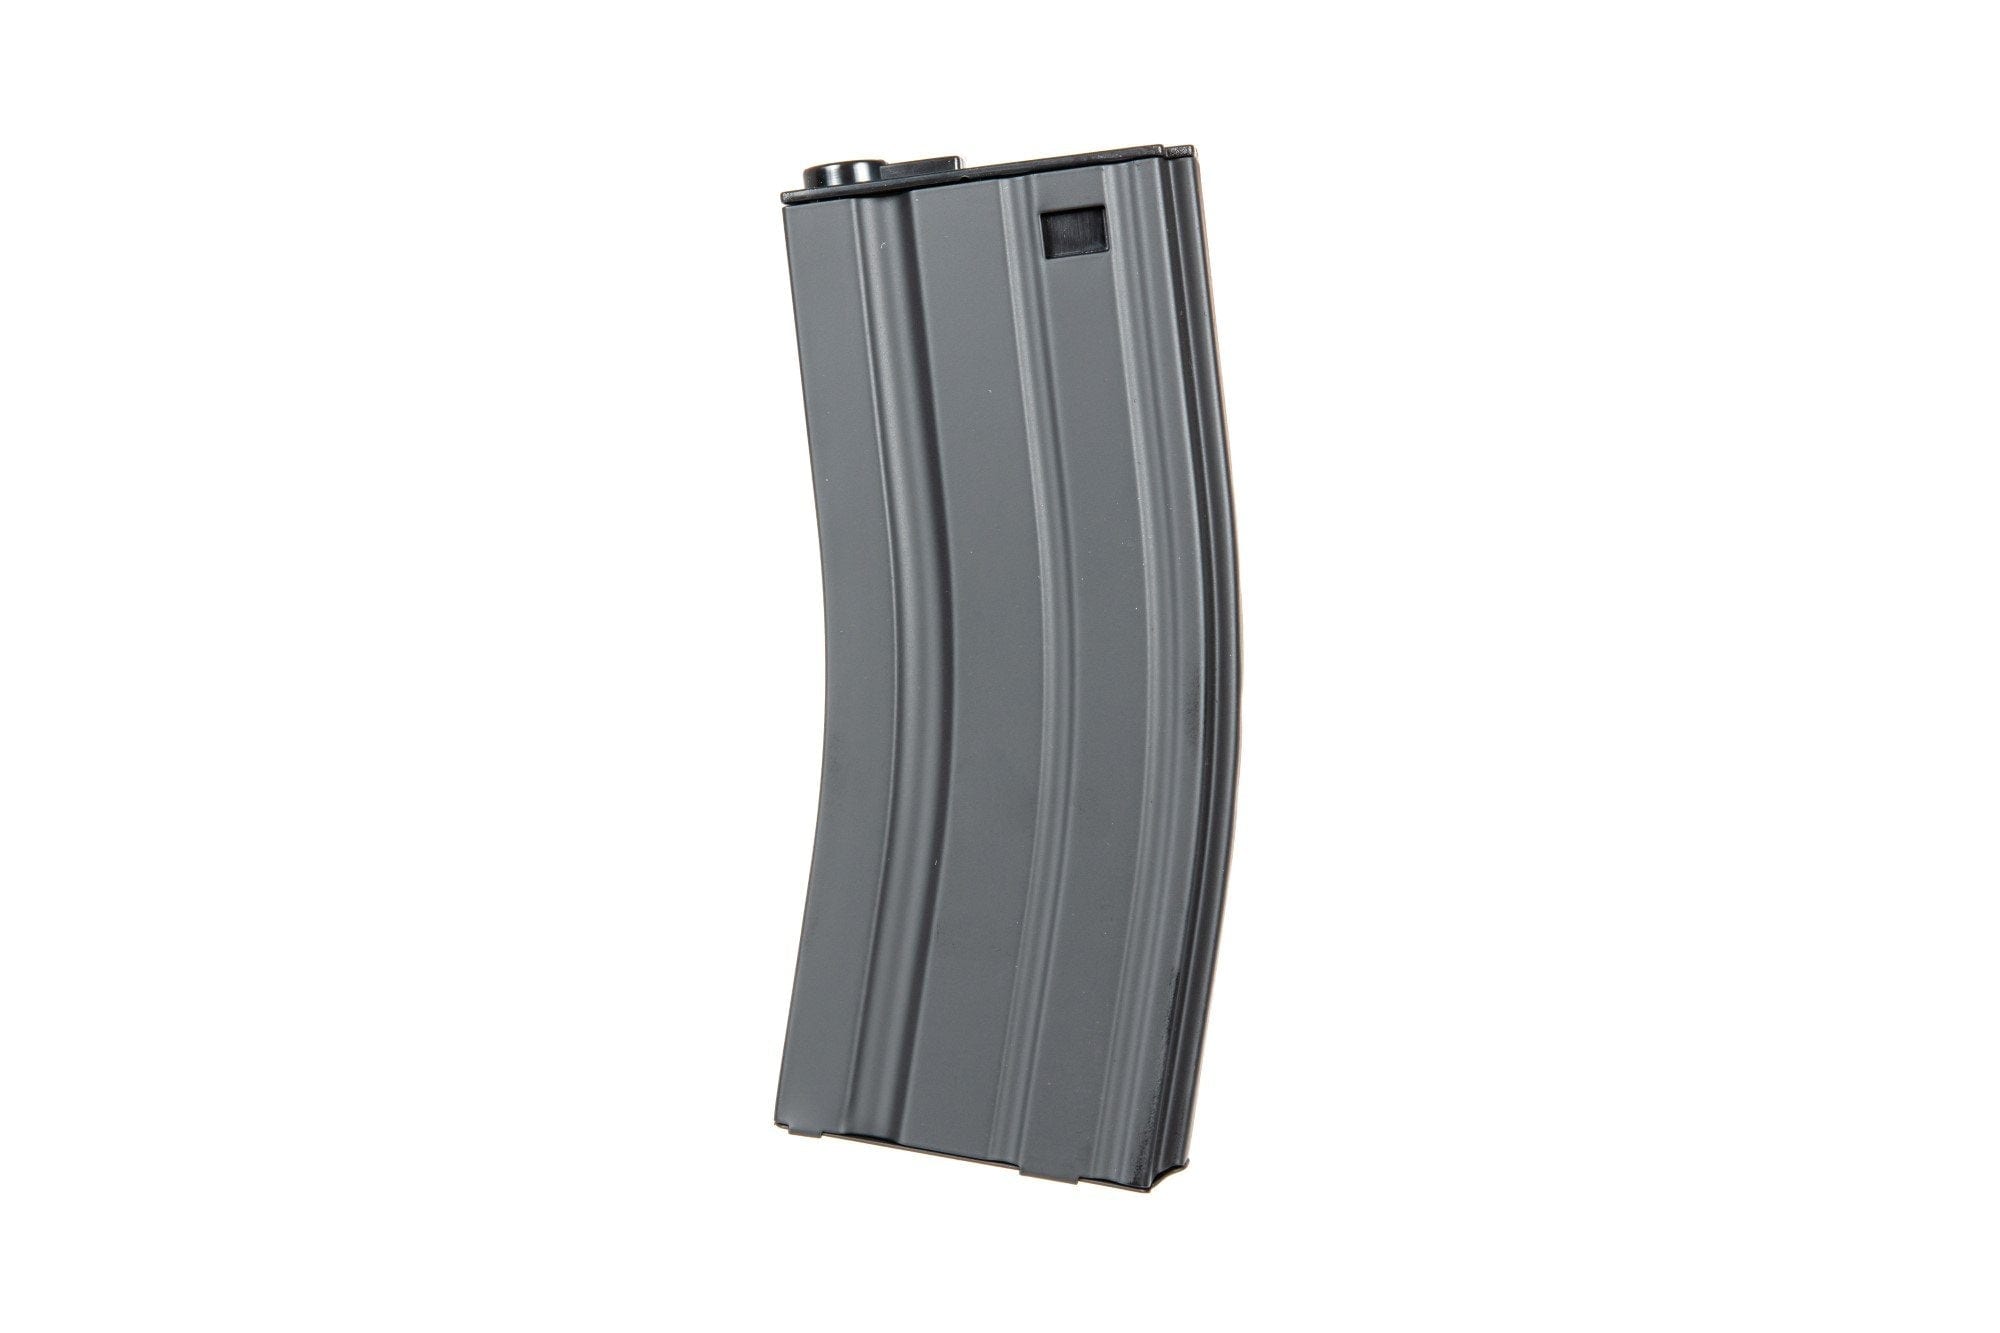 70rd low-cap magazine for the M4 / M16 type replicas - black by Specna Arms on Airsoft Mania Europe